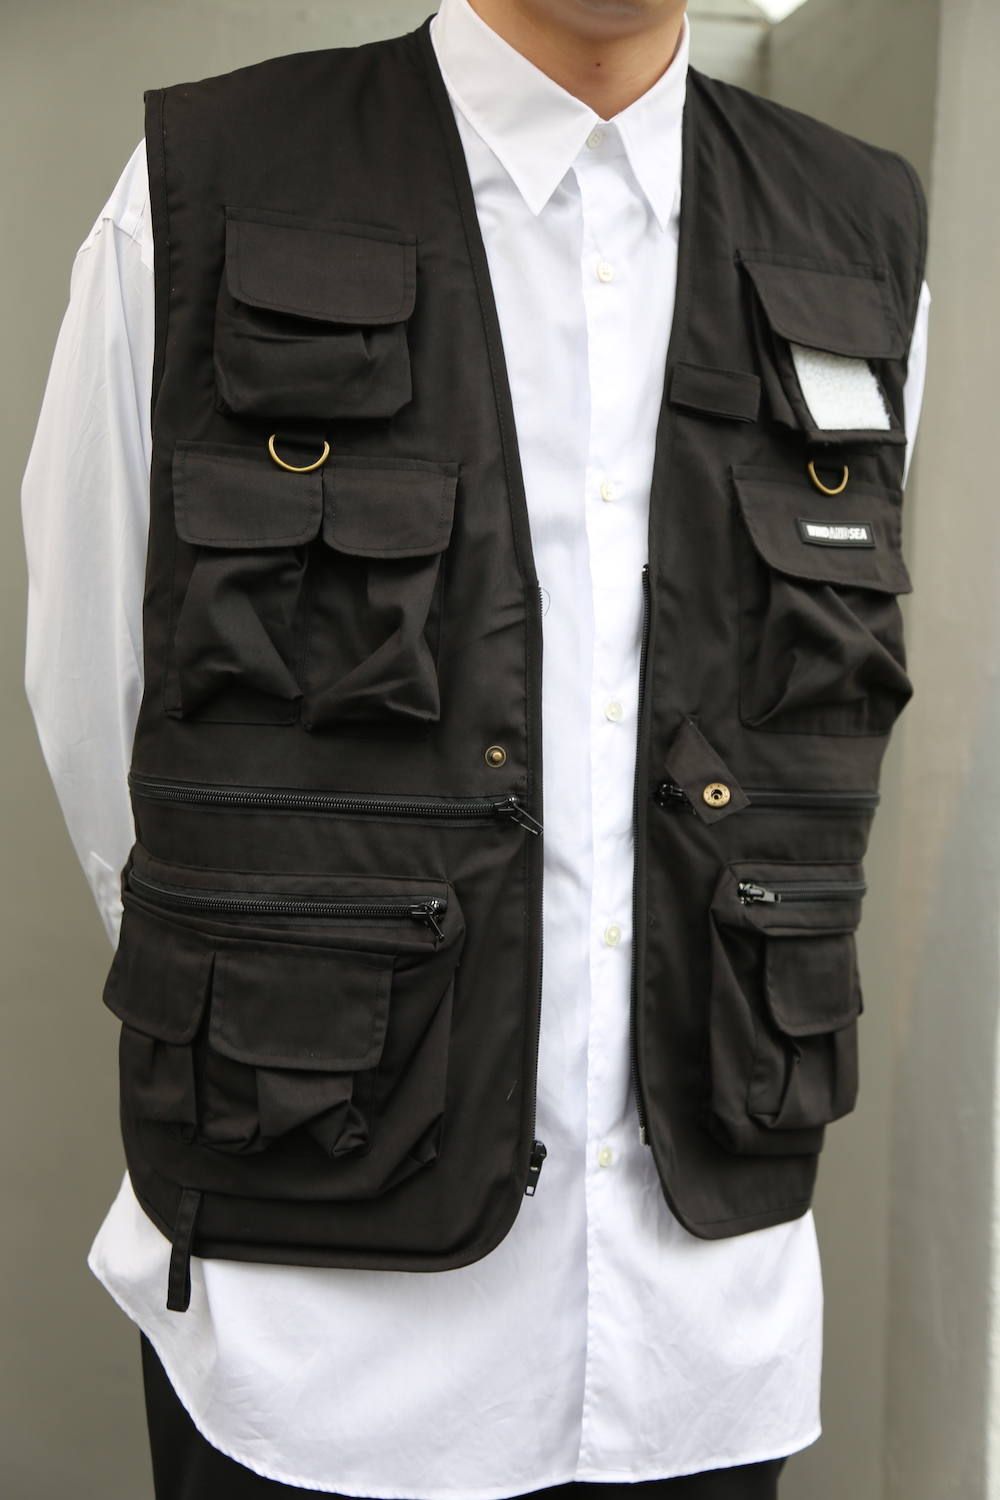 WIND AND SEA 「UTILITY VEST」style.2020.2.29. | 833 | mark